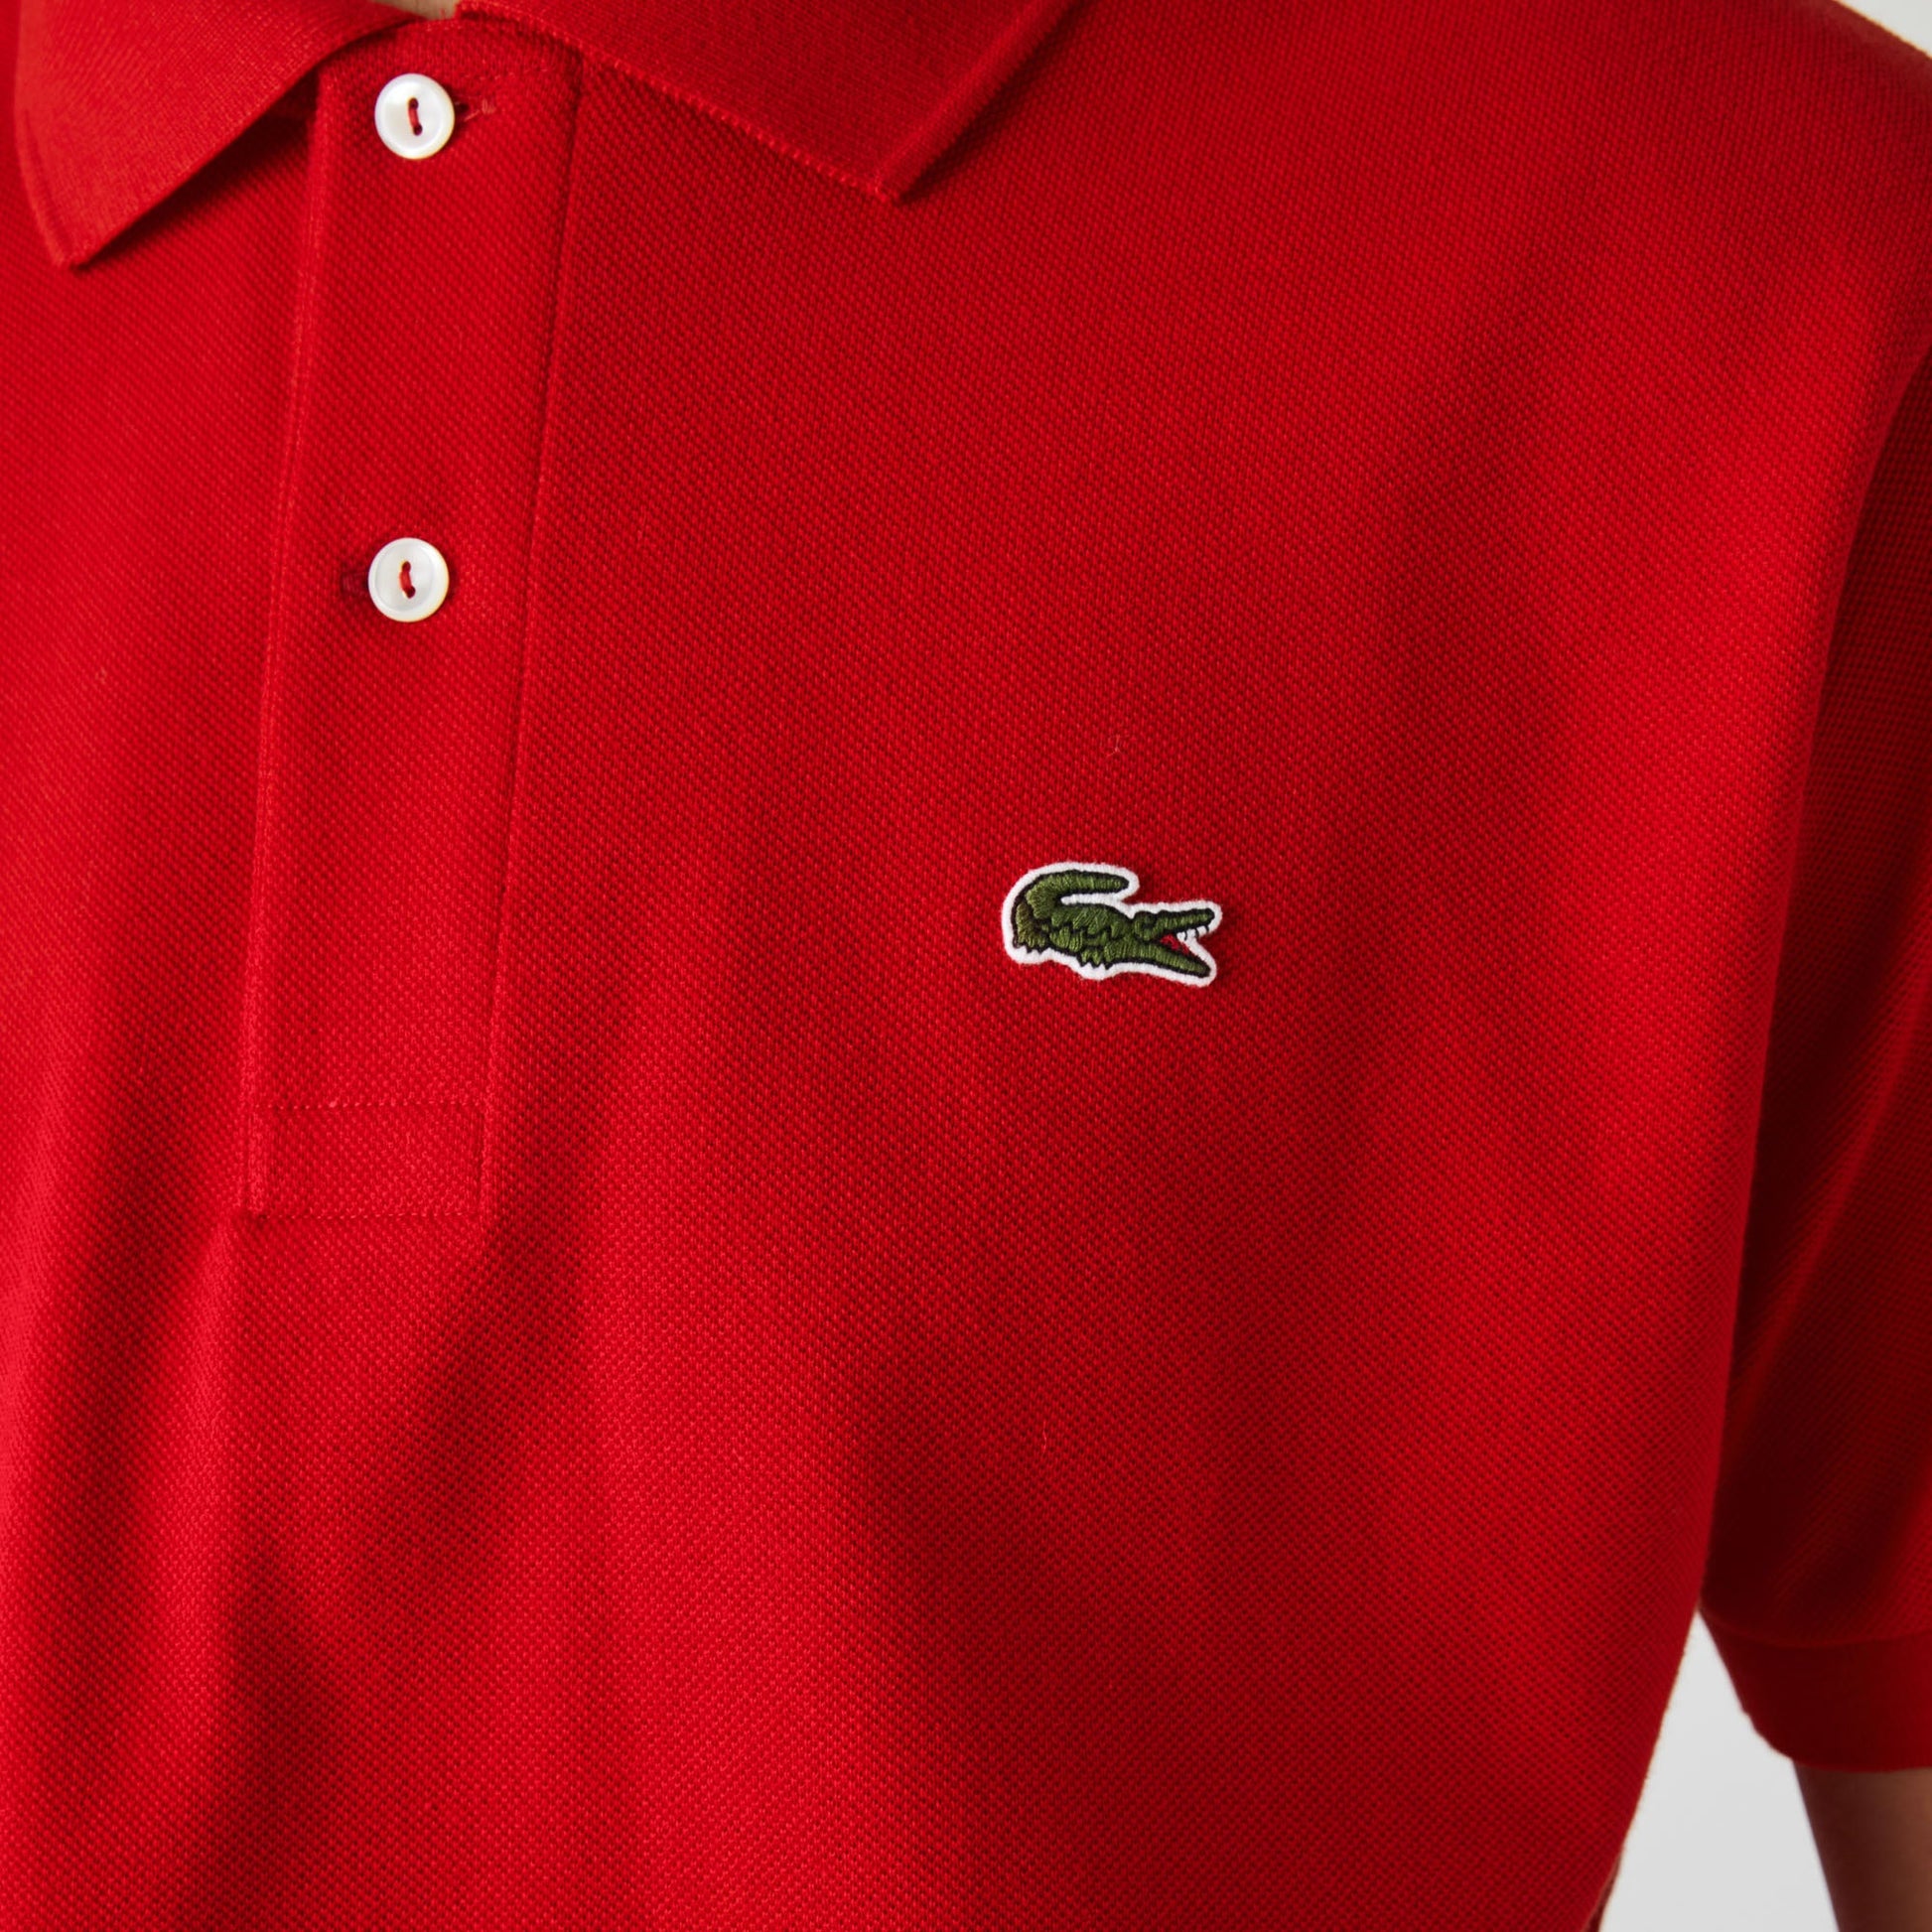 LACOSTE - Red CLASSIC Fit - L1212 240 - POLO SHIRT Size 8 pieces ( S-XXL)